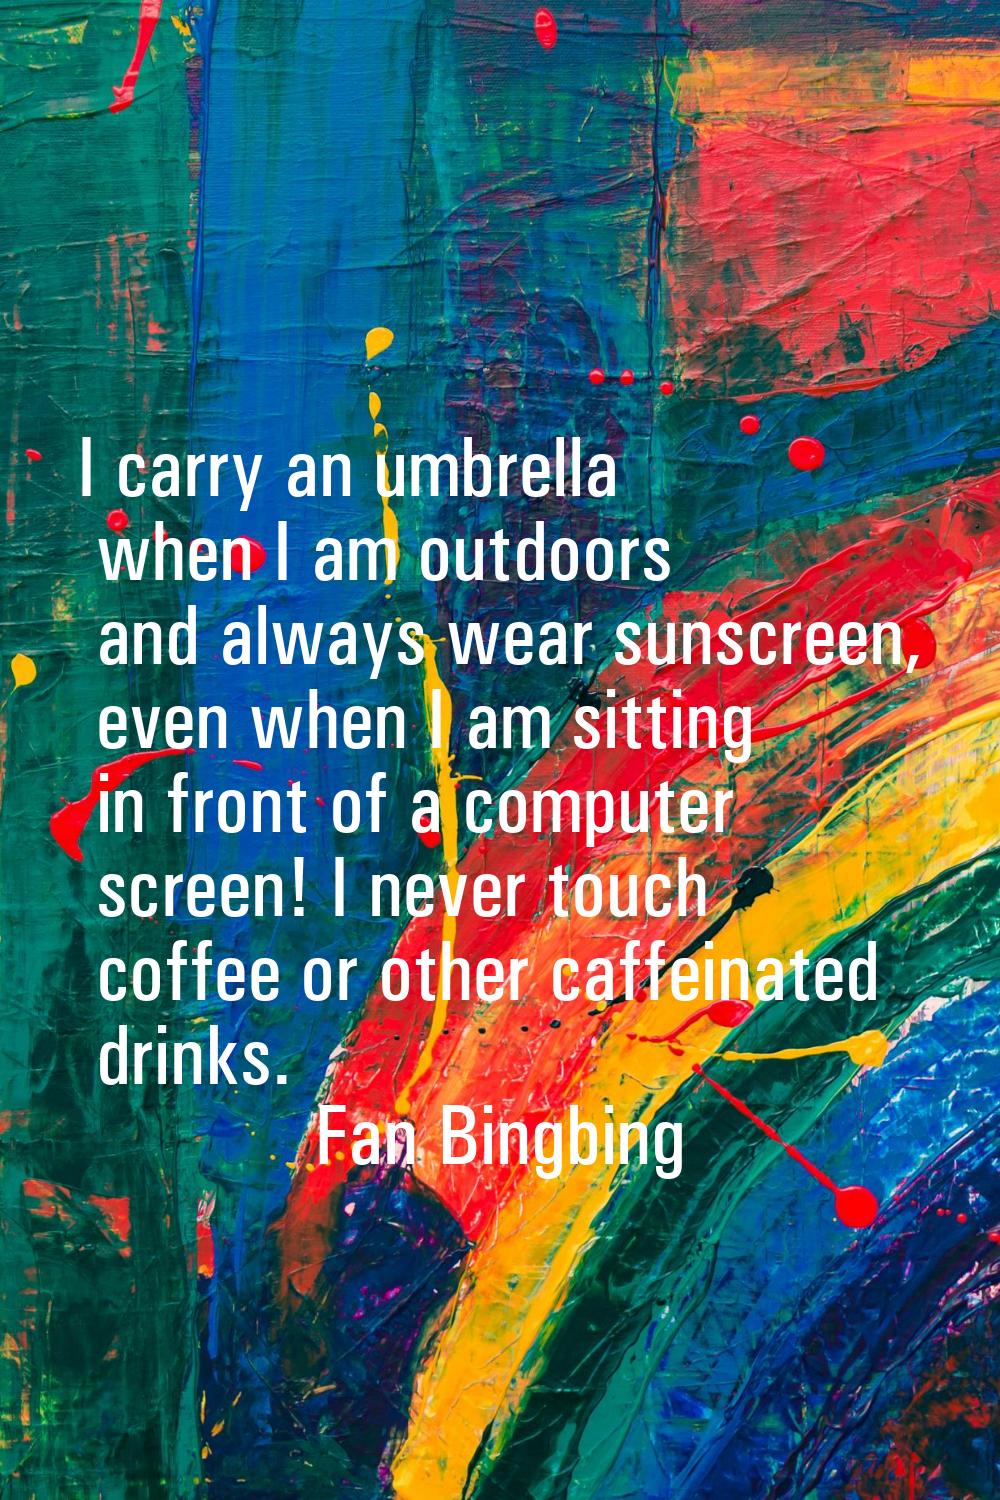 I carry an umbrella when I am outdoors and always wear sunscreen, even when I am sitting in front o